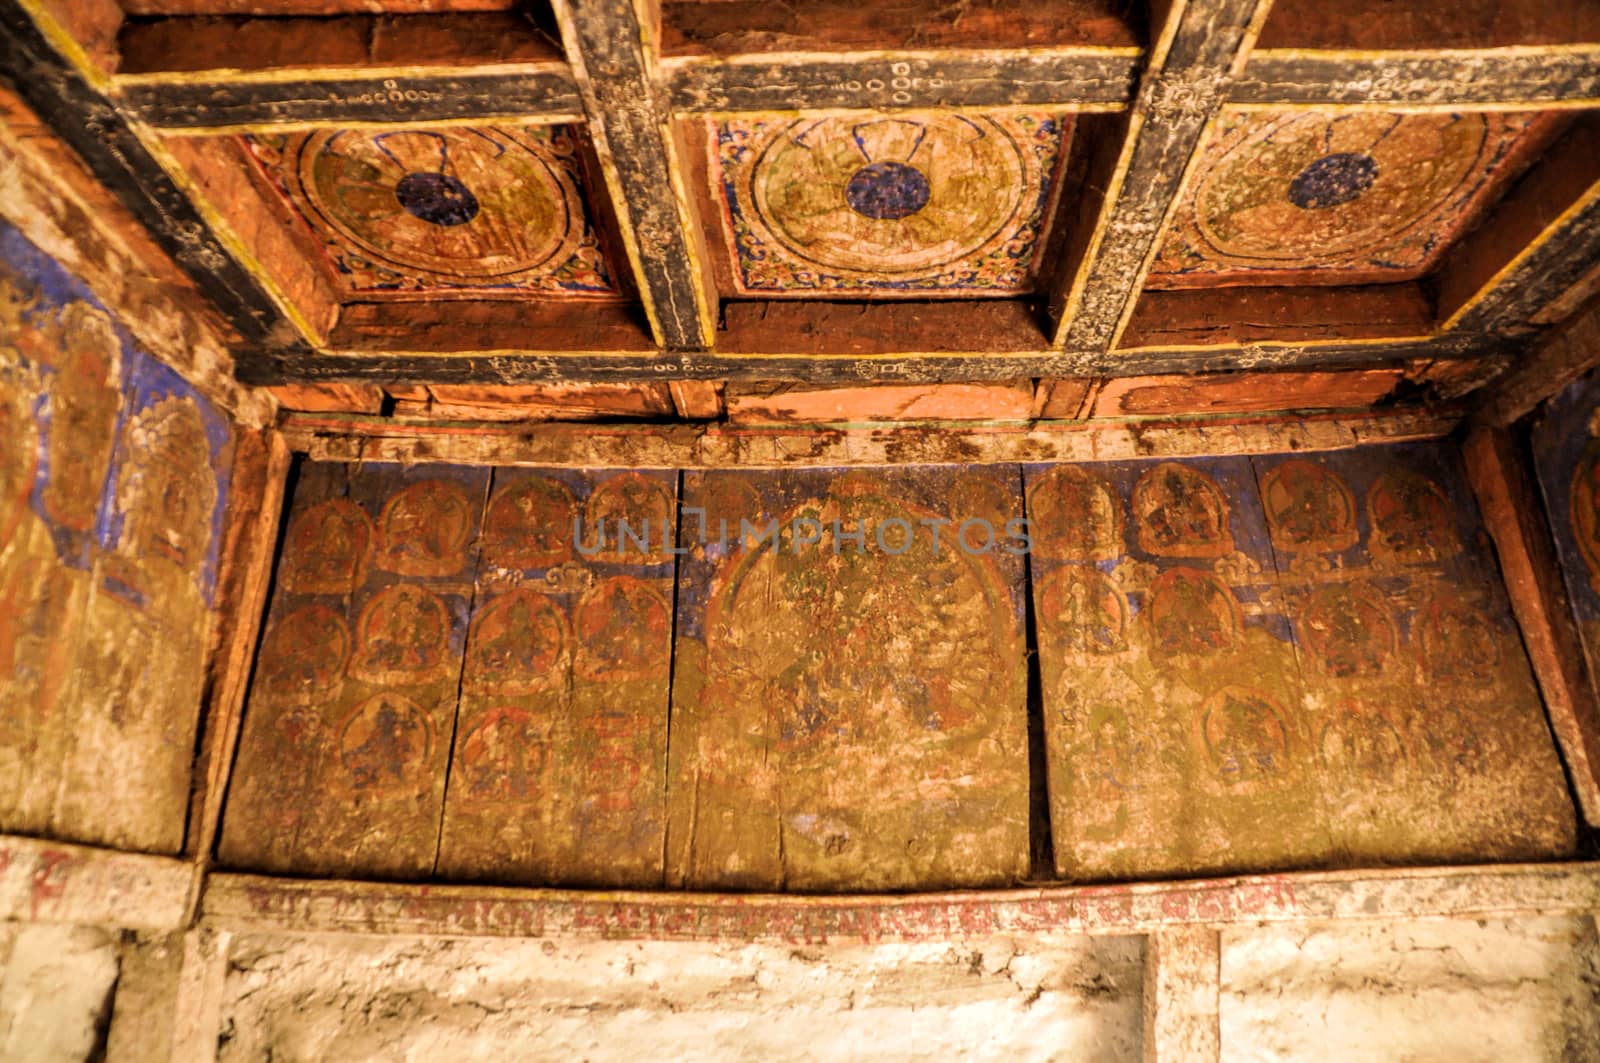 Decorated ceiling in an old nepalese house in himalayas